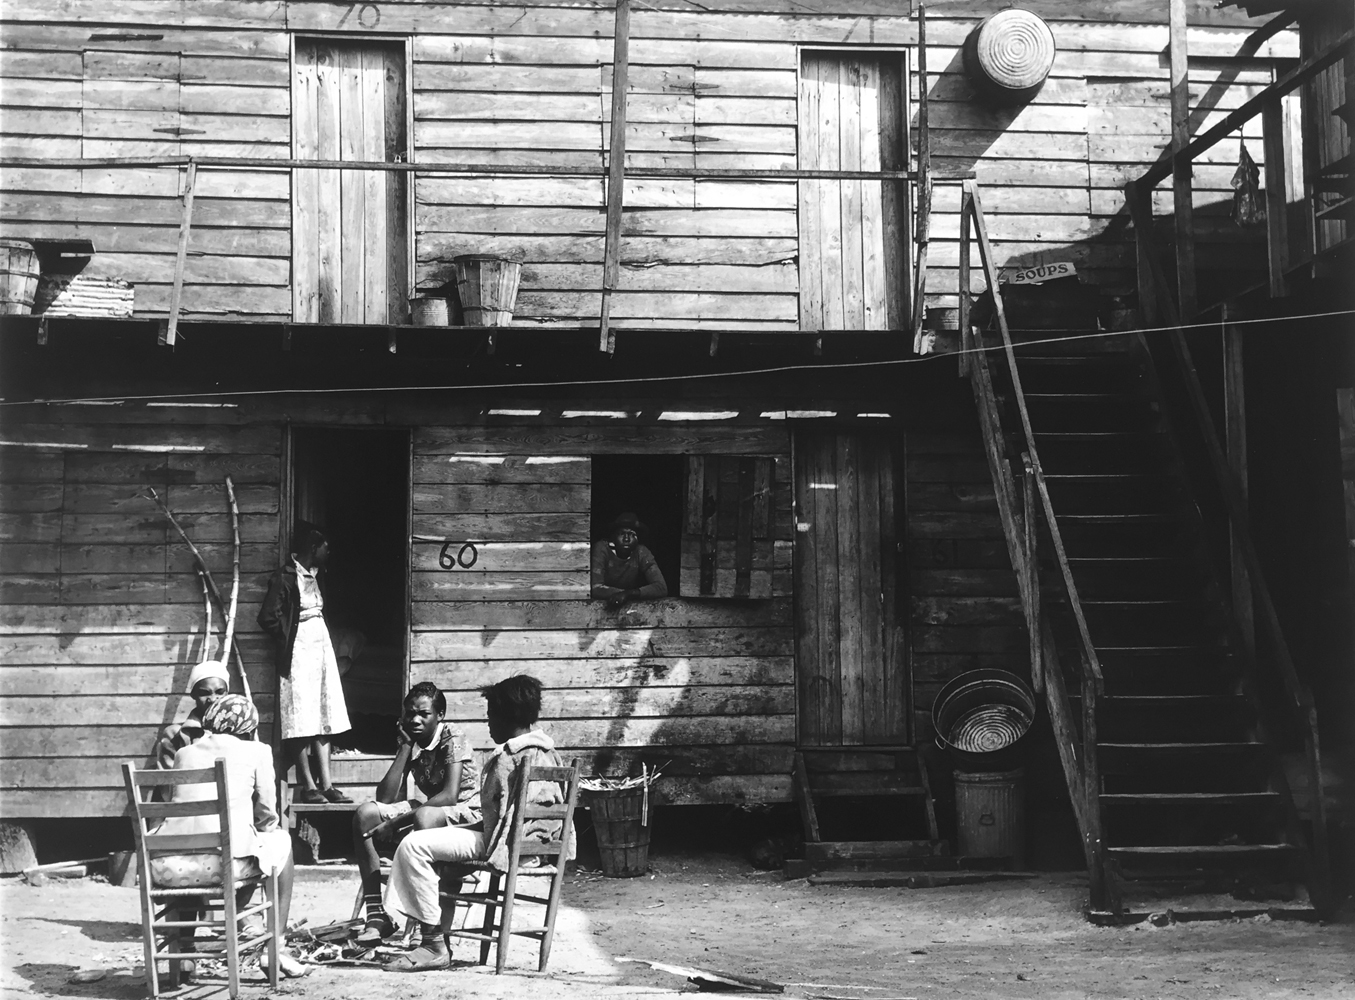 Marion Post Wolcott, Pahokee Hotel, migrant vegetable pickers’ quarters, Near Homestead, Florida, 1941, gelatin silver print, 11 x 14 inches, price on request